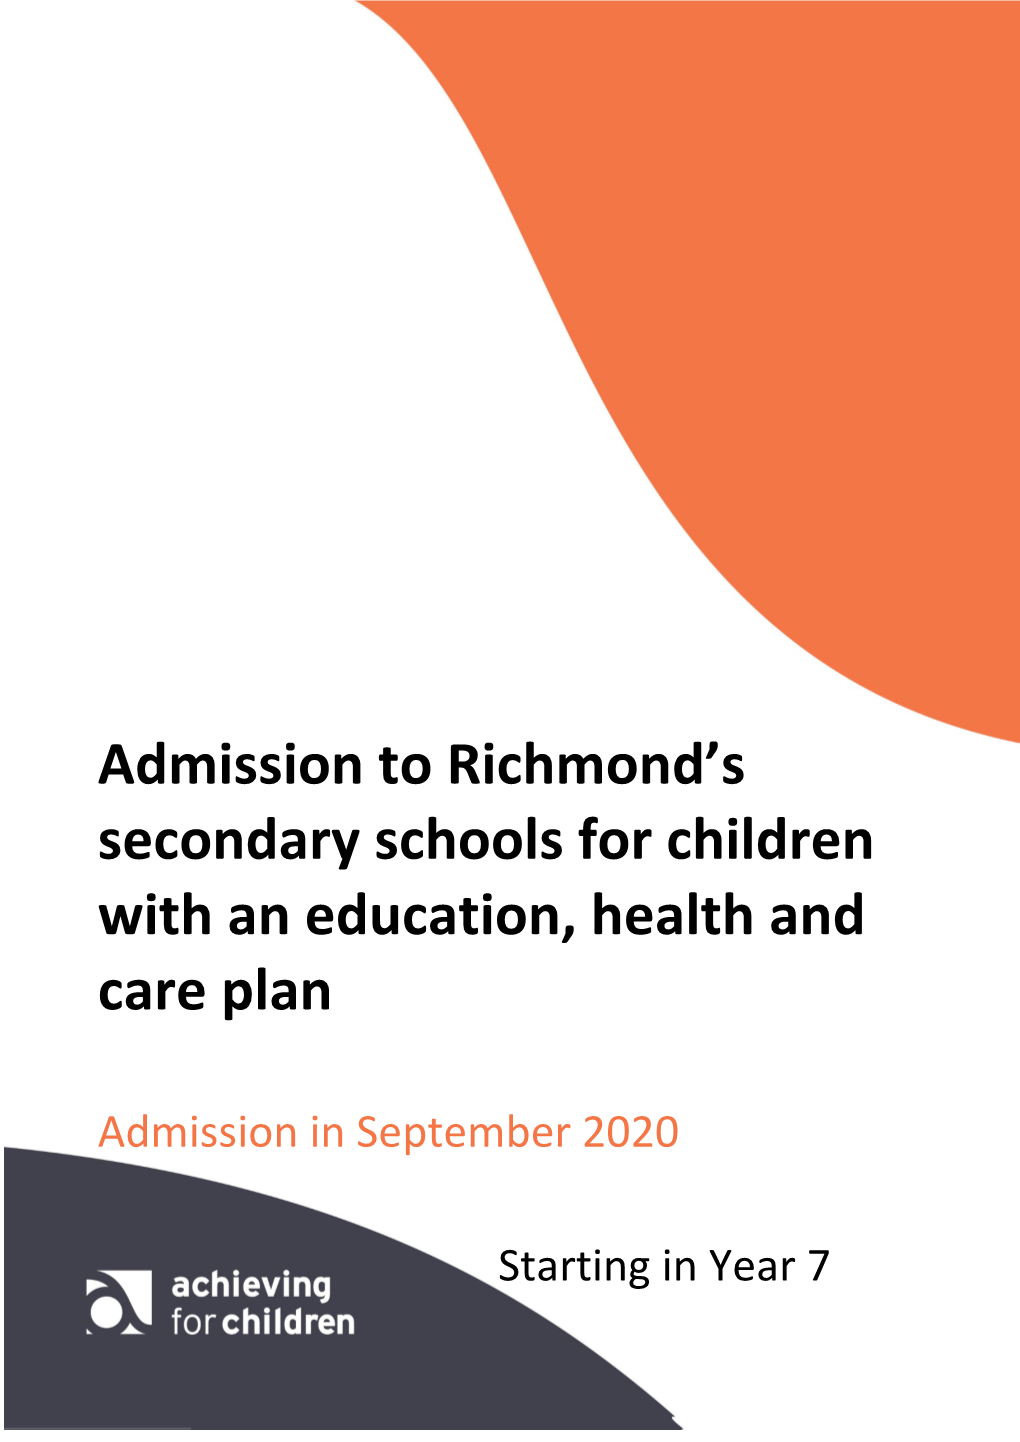 Admission to Richmond's Secondary Schools for Children with An